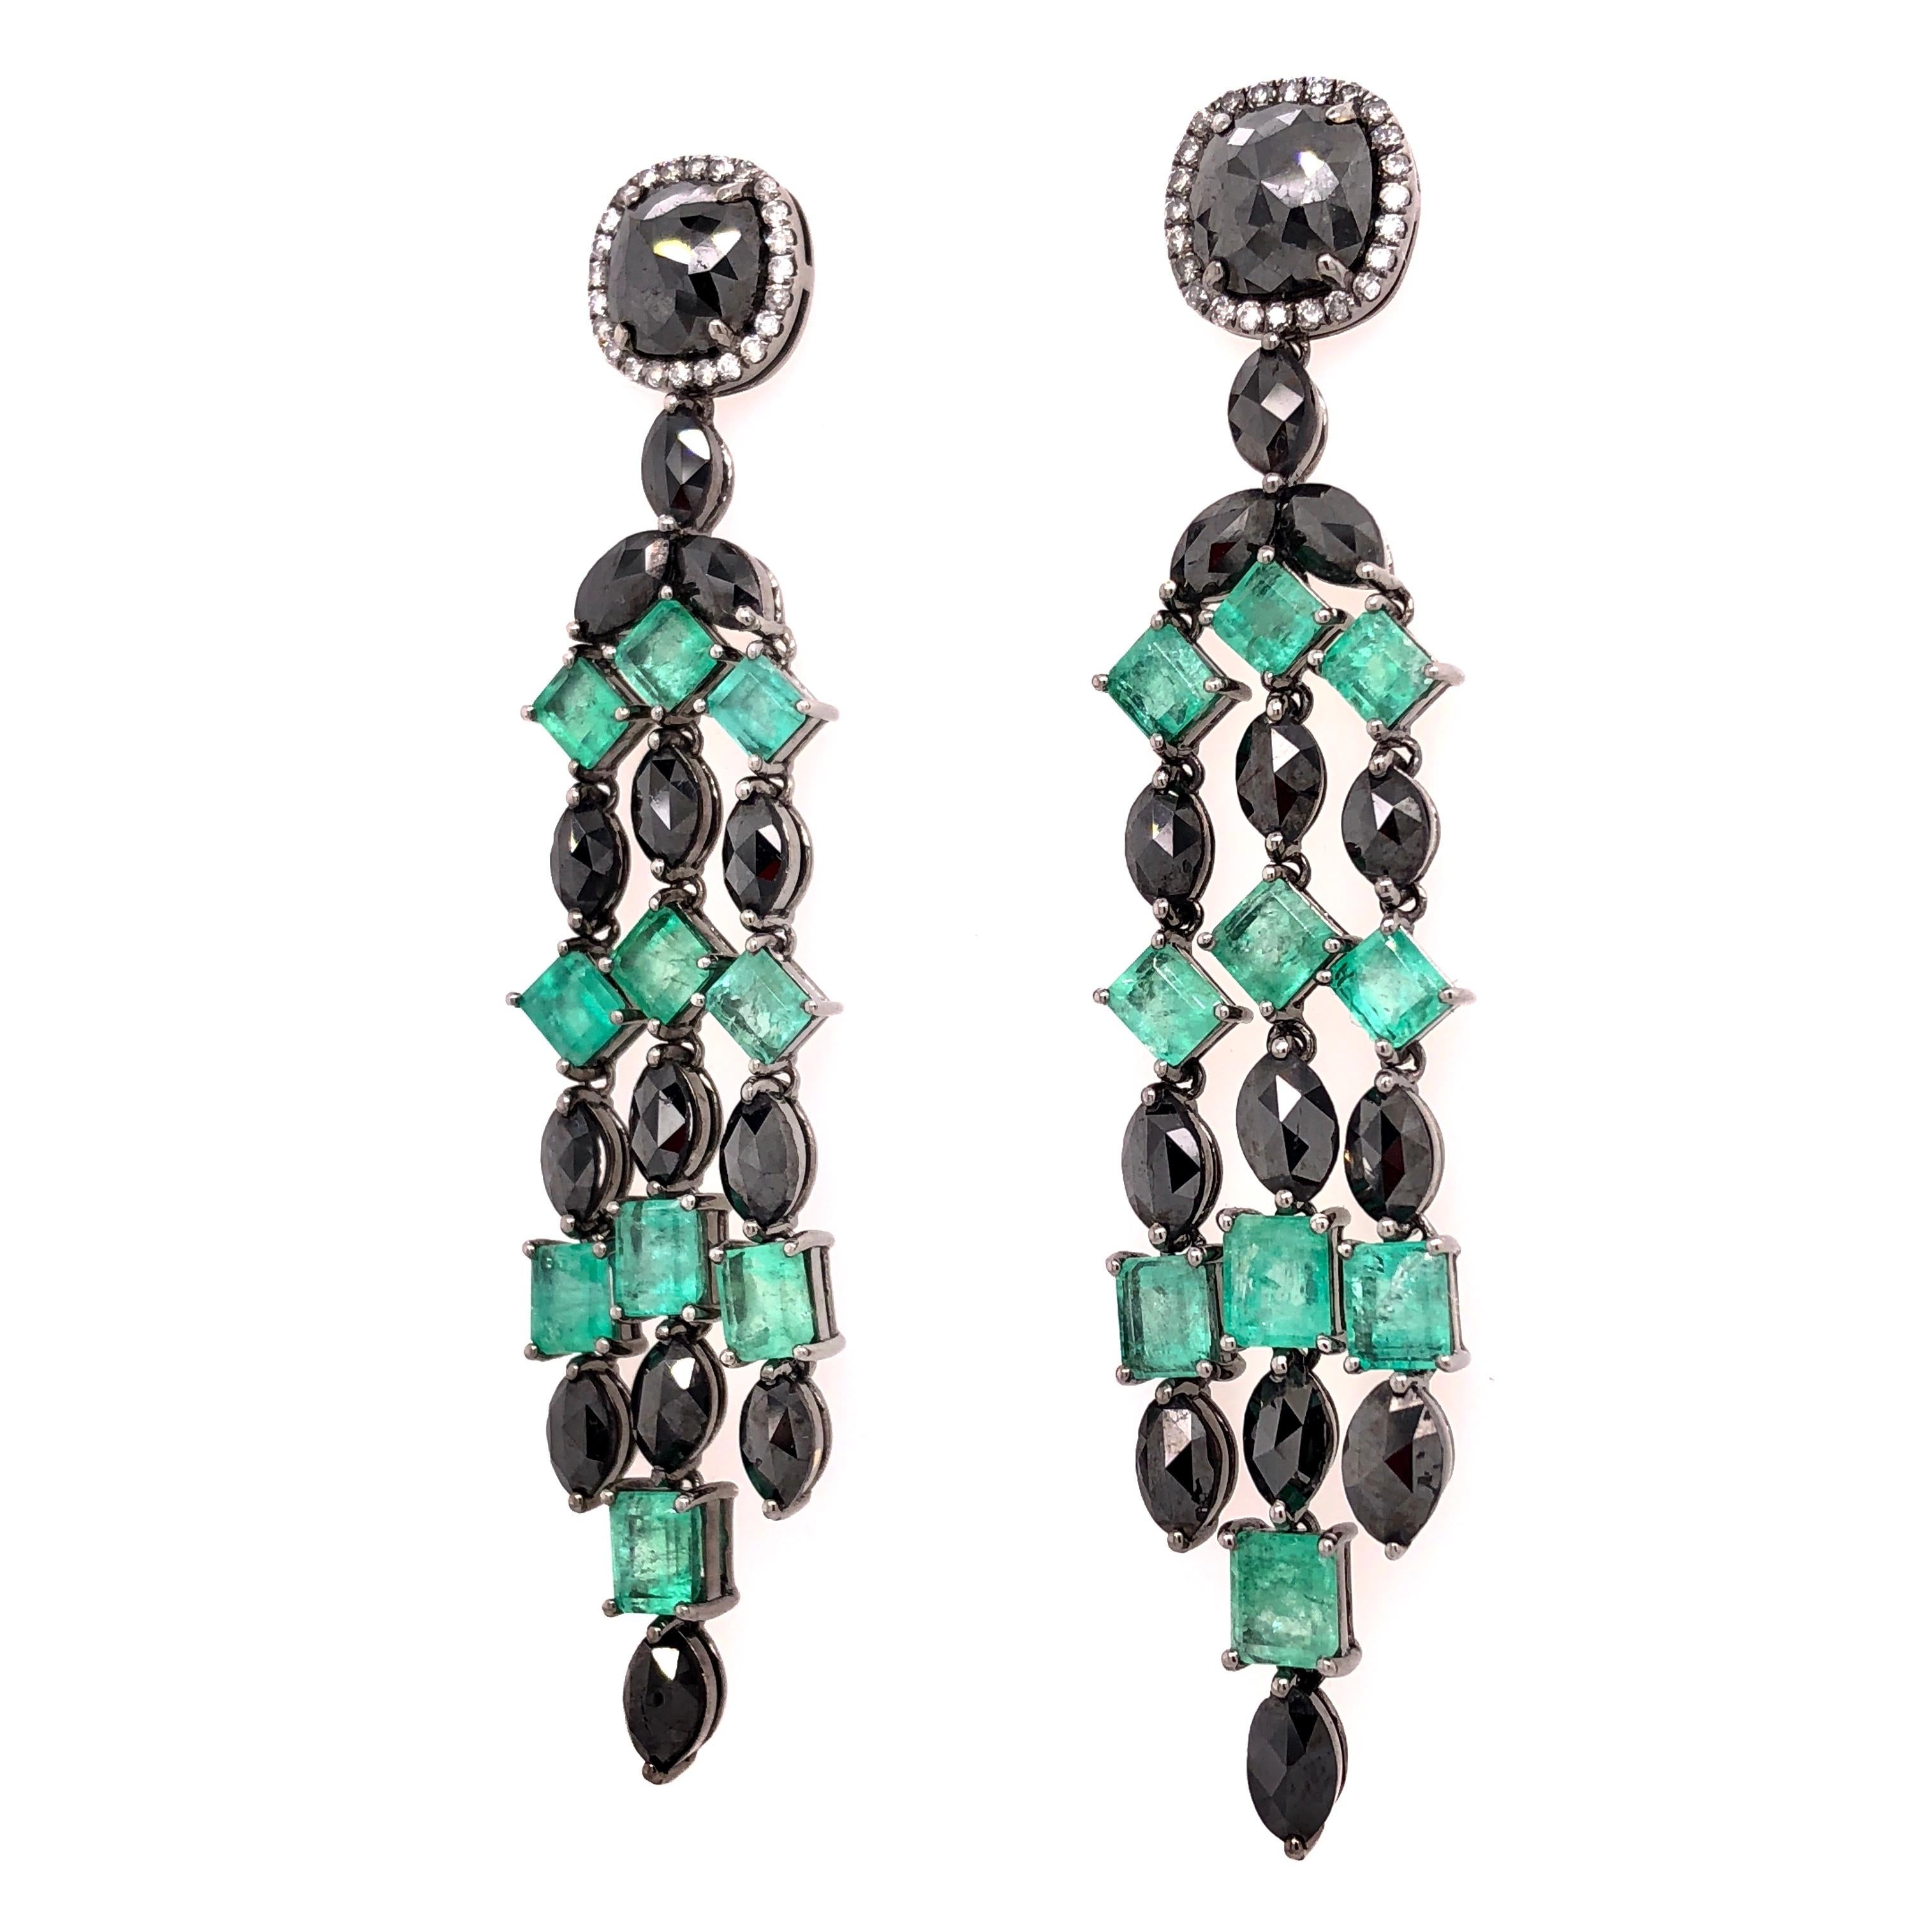 Green Lagoon Collection

Colombian Emerald and black Diamond chandelier earrings set in 18K black rhodium gold. 

Emerald: 5.89ct total weight.
Black Diamonds: 7.52ct total weight.
Diamond: 0.25ct total weight. 
All diamonds are G-H/SI